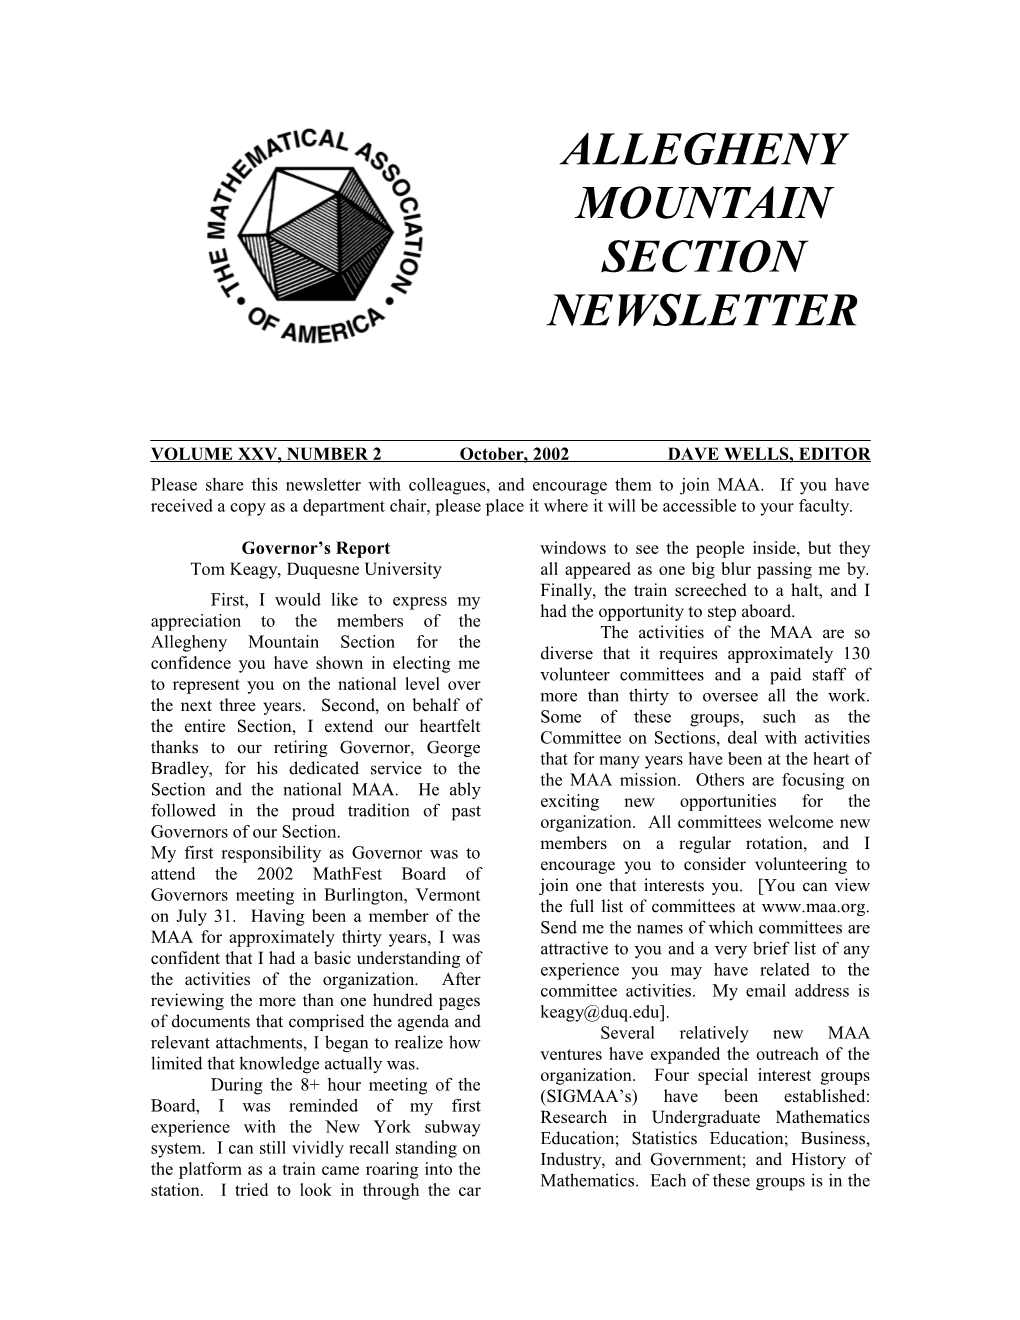 Allegheny Mountain Section Newsletter